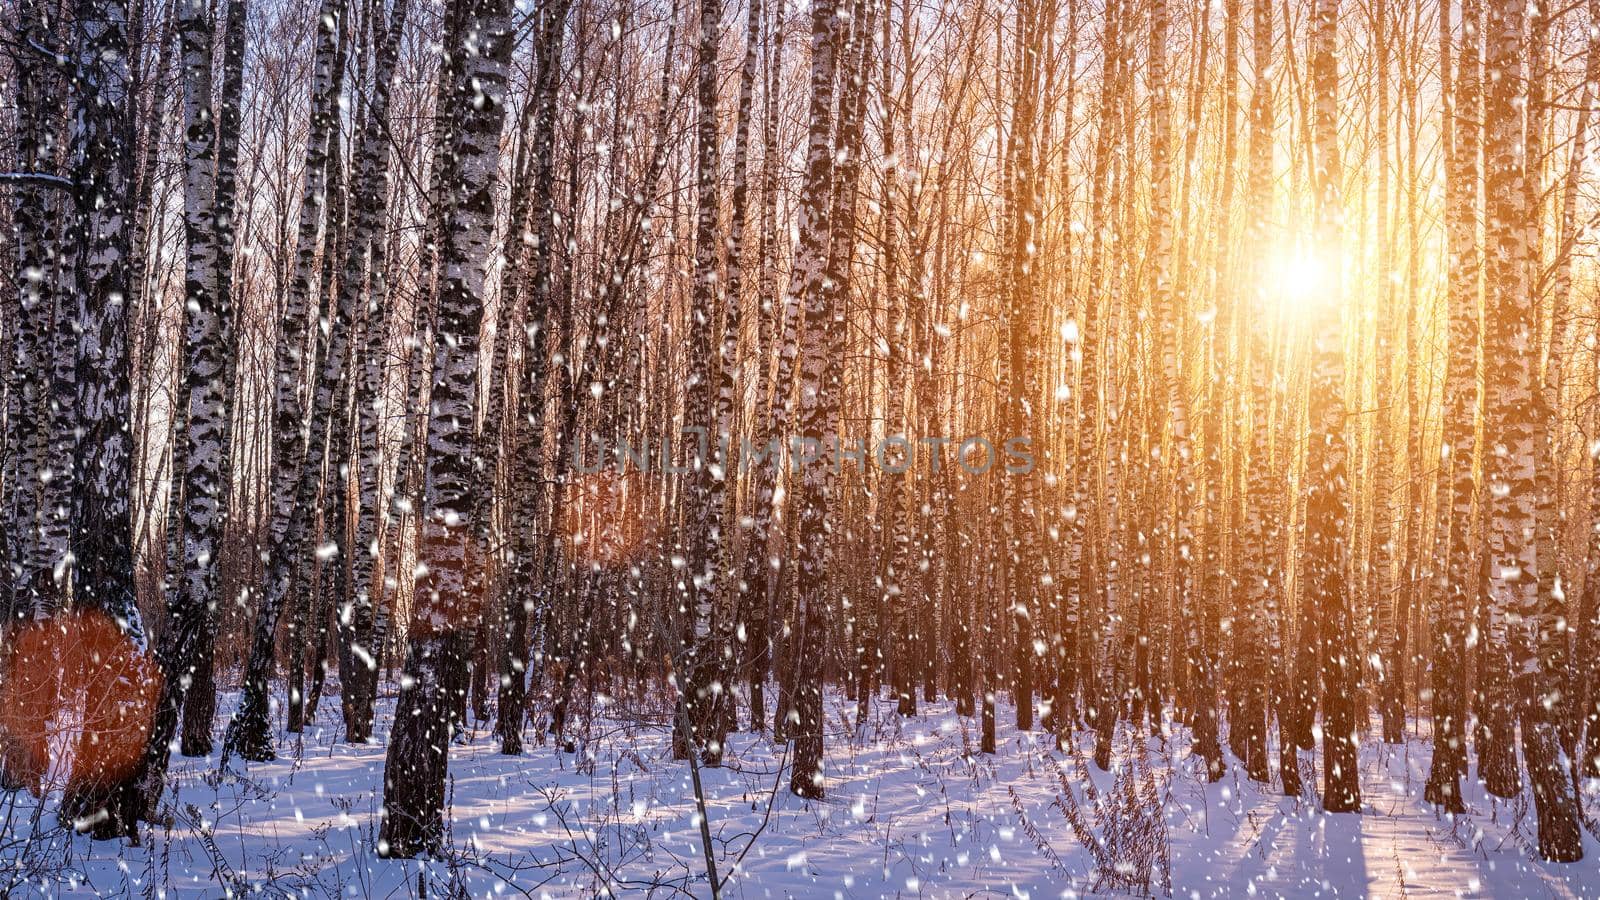 Sunset or sunrise in a birch grove with a falling snow. Rows of birch trunks with the sun's rays. Snowfall. by Eugene_Yemelyanov